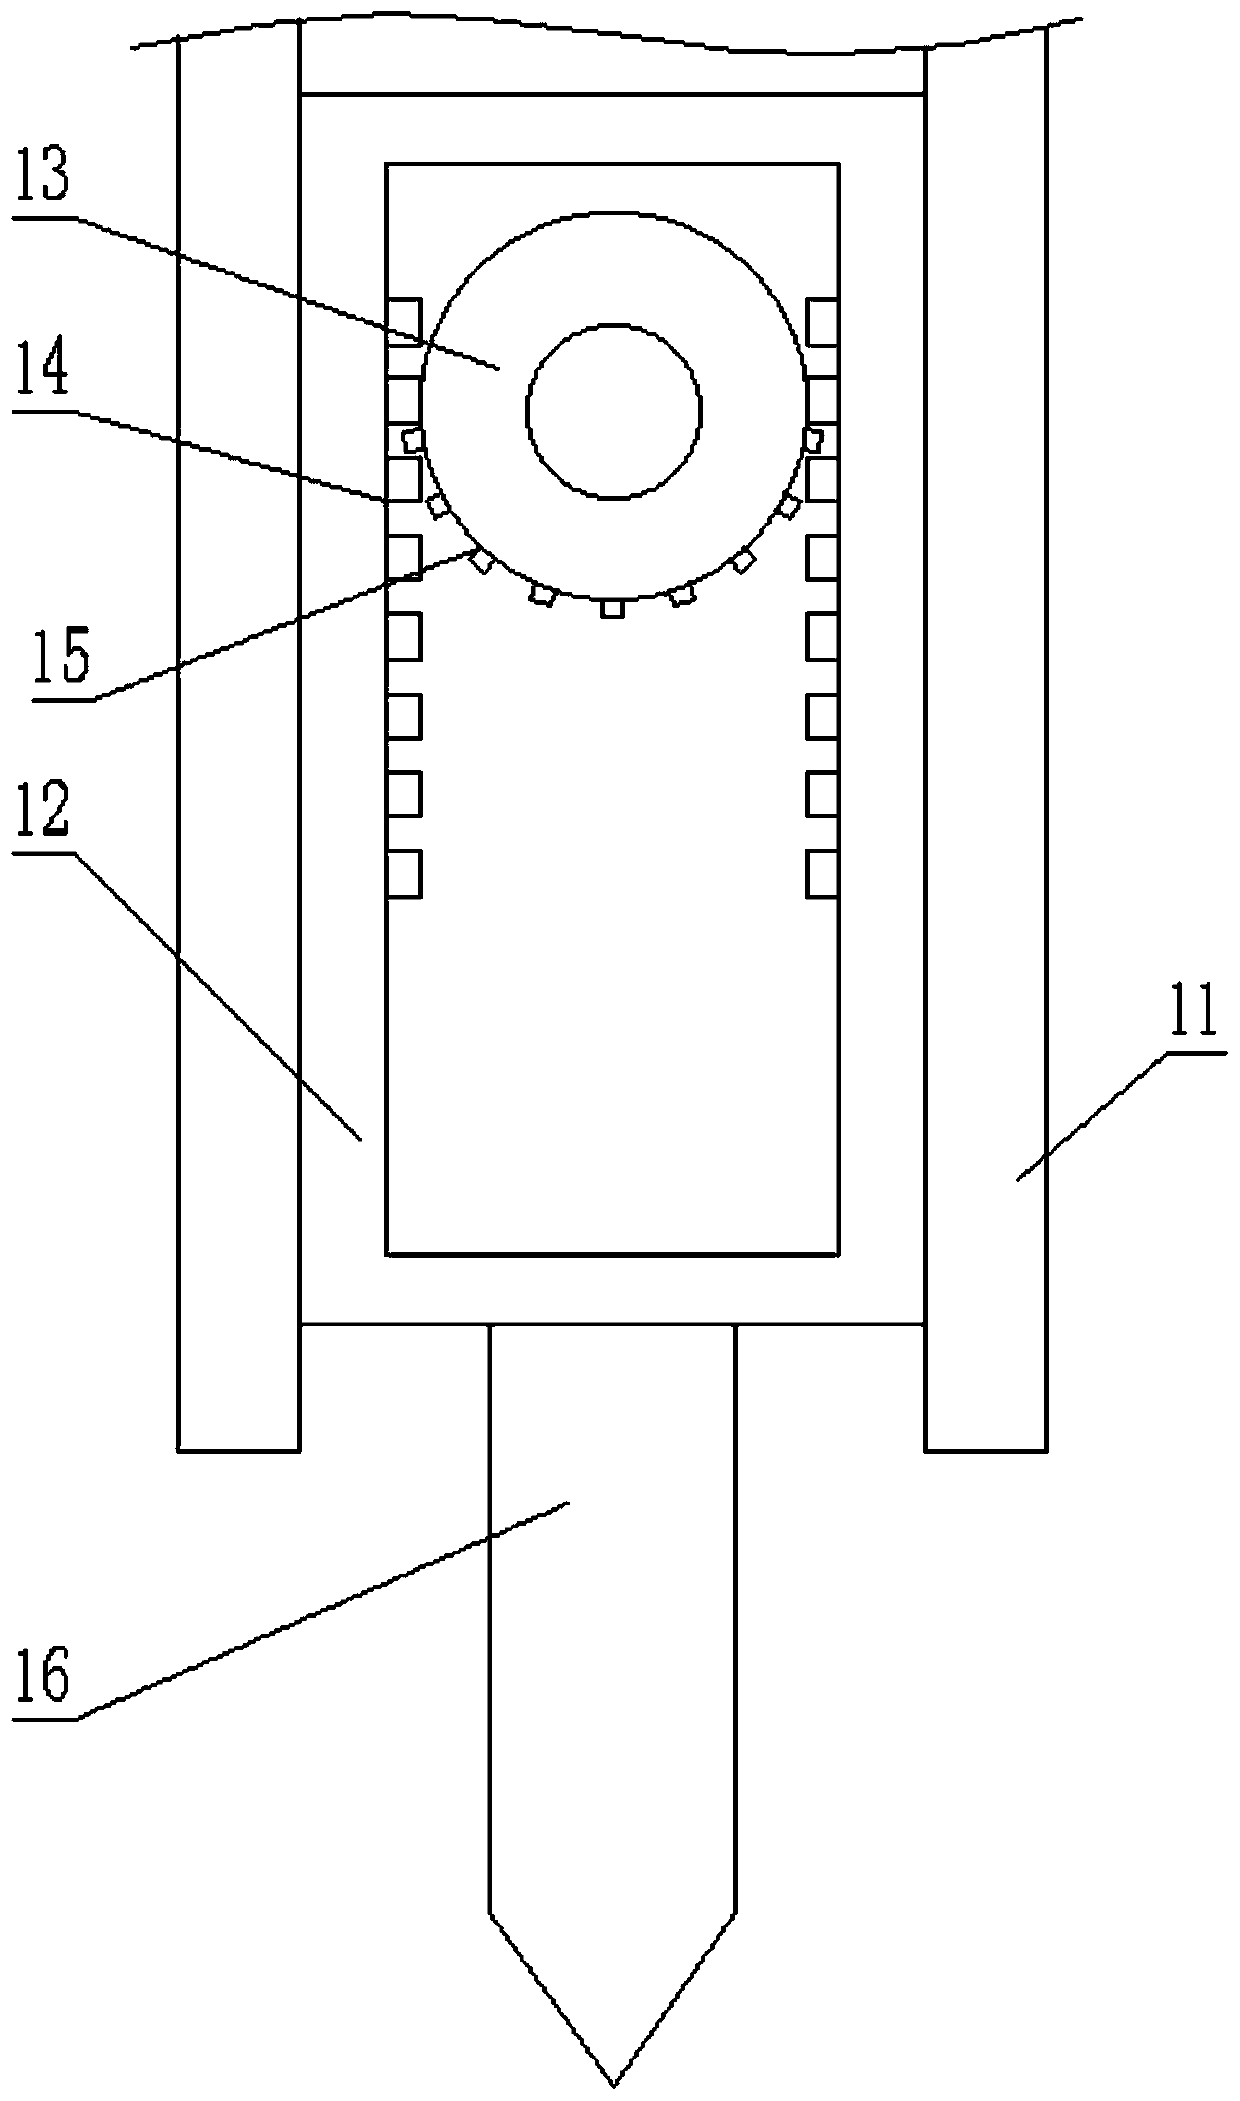 Primary processing device of silage